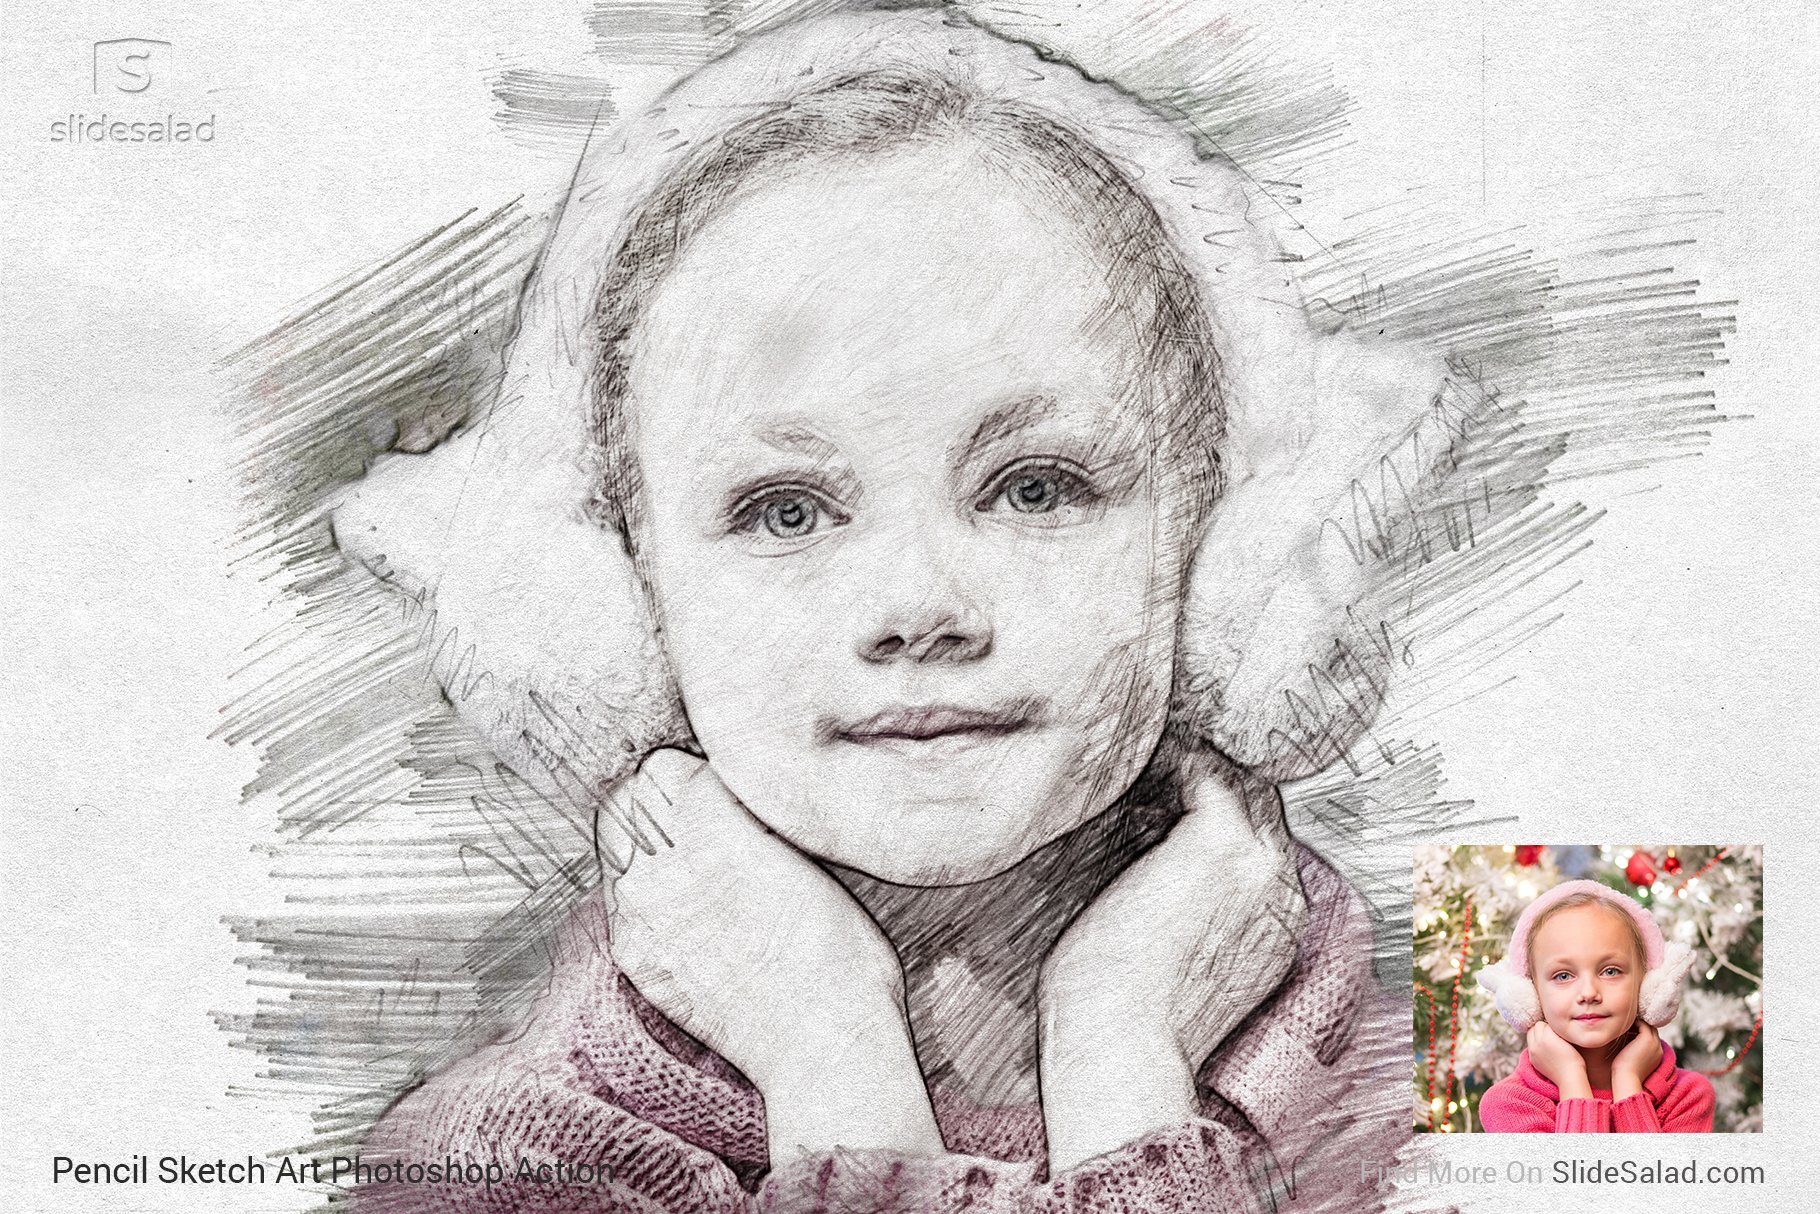 Pencil Sketch Art Photoshop Action - girl portrait example with photo.